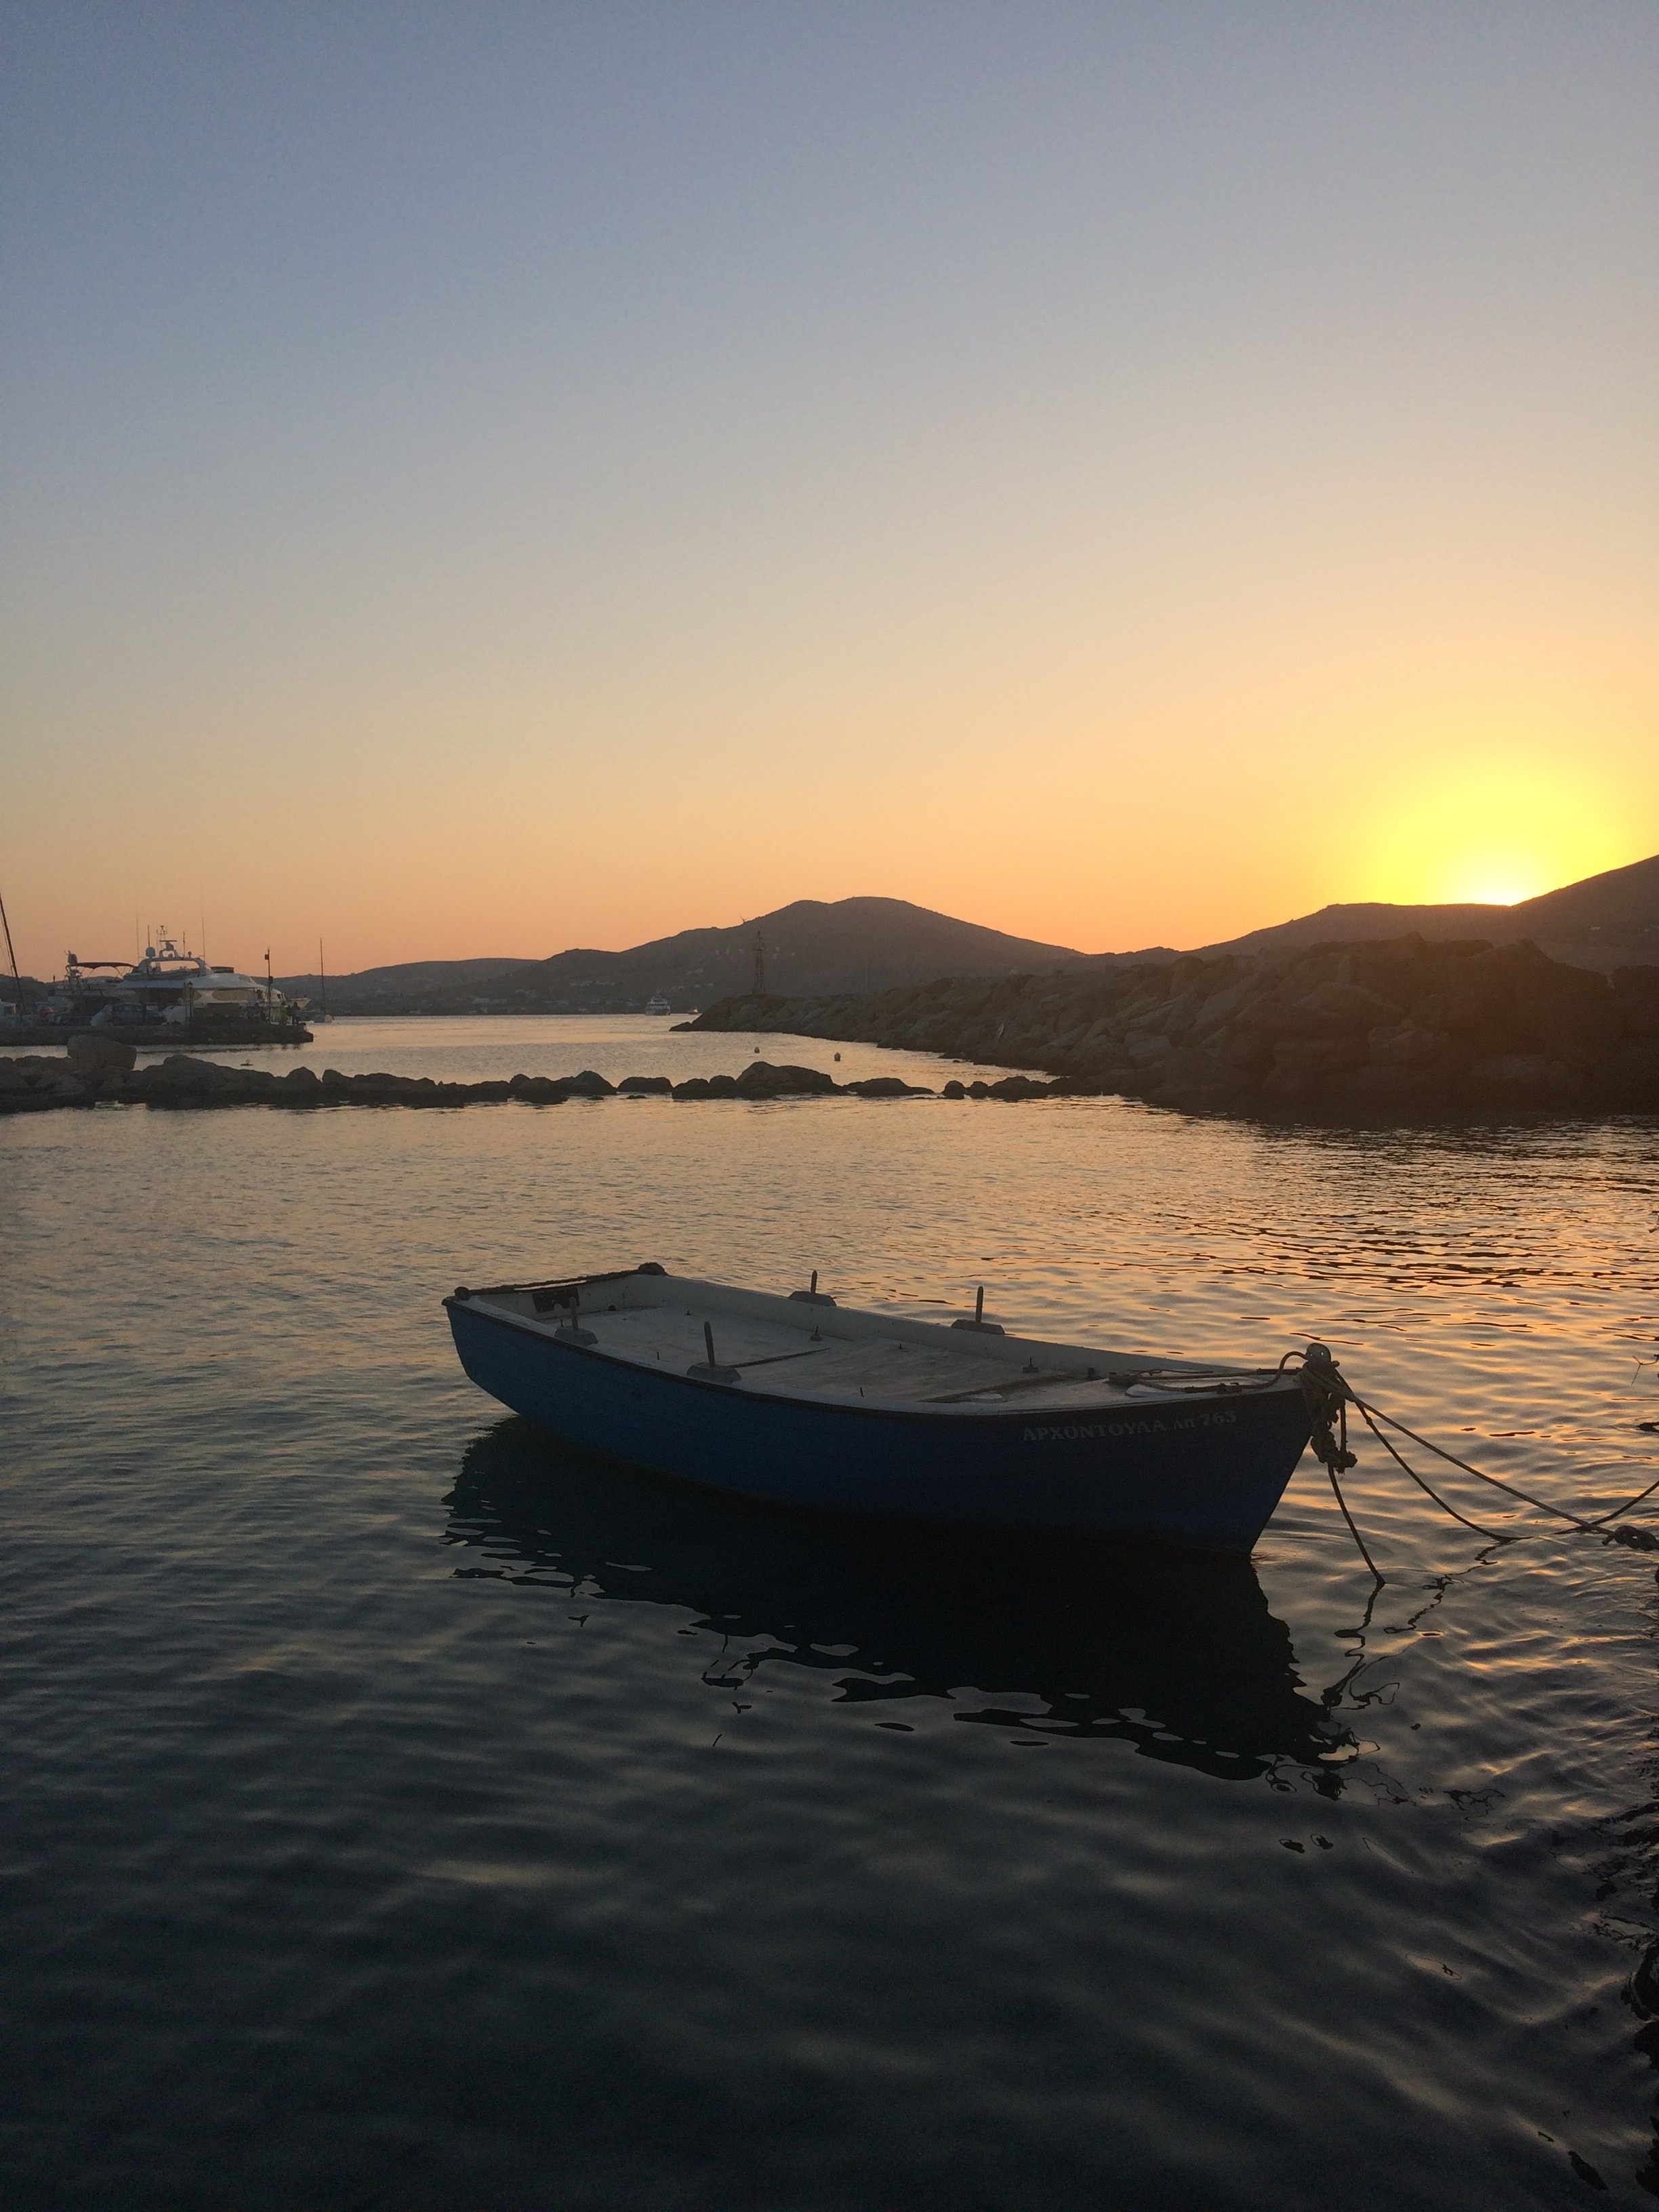 A lovely evening in the Greek island of Paros by the sea x